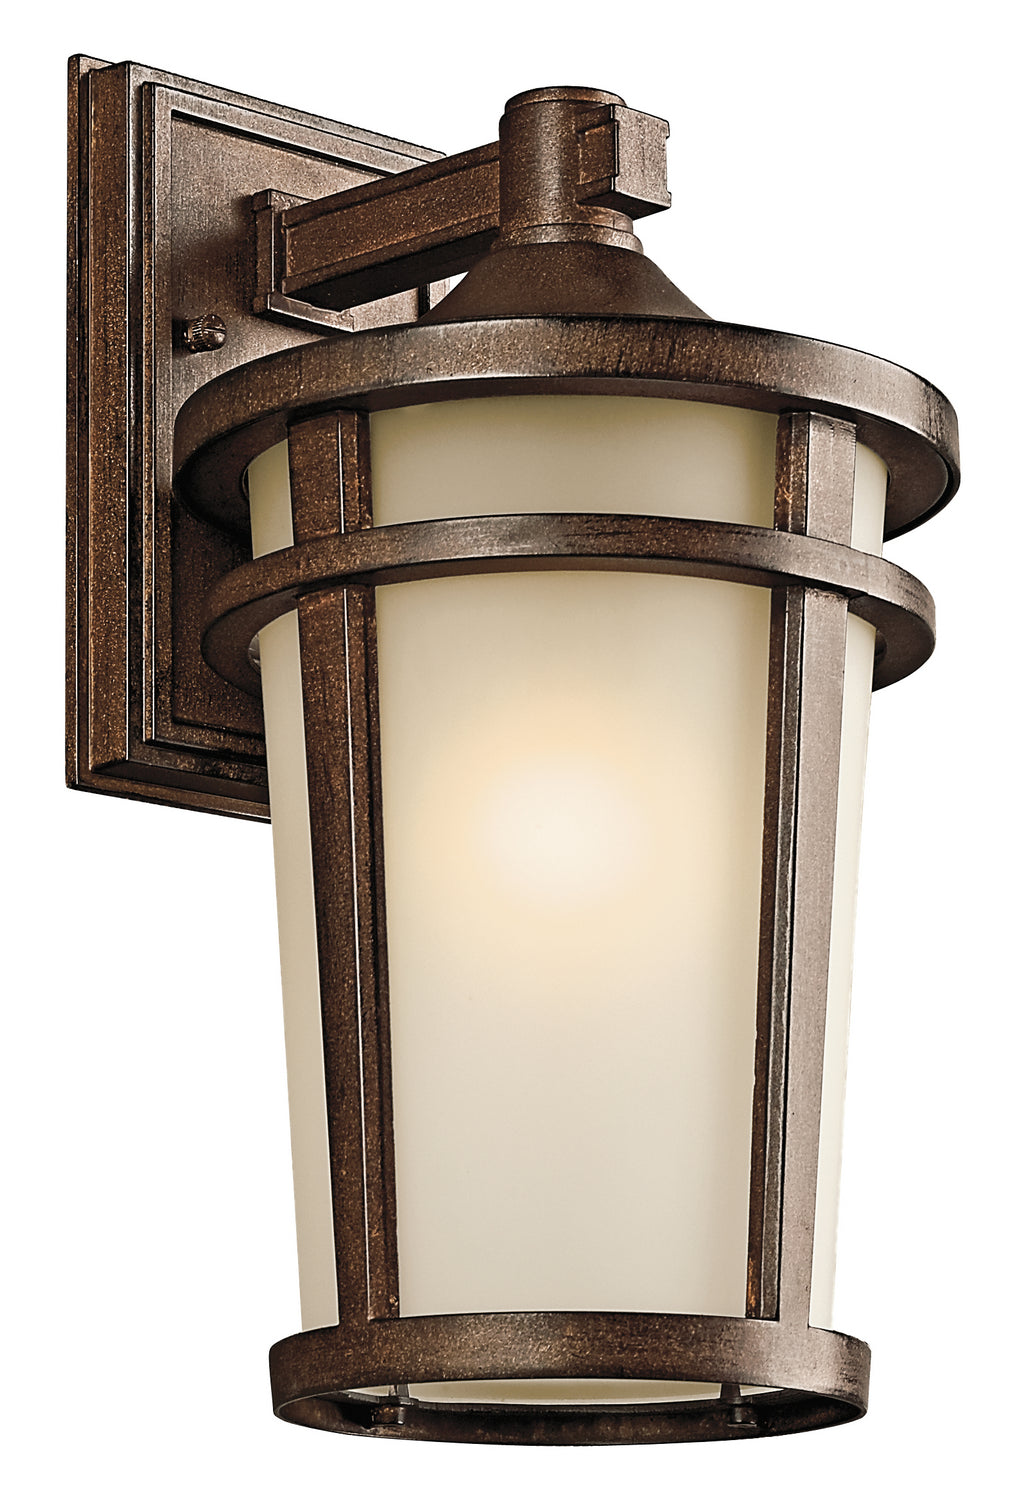 Kichler Canada - One Light Outdoor Wall Mount - Atwood - Brown Stone- Union Lighting Luminaires Decor